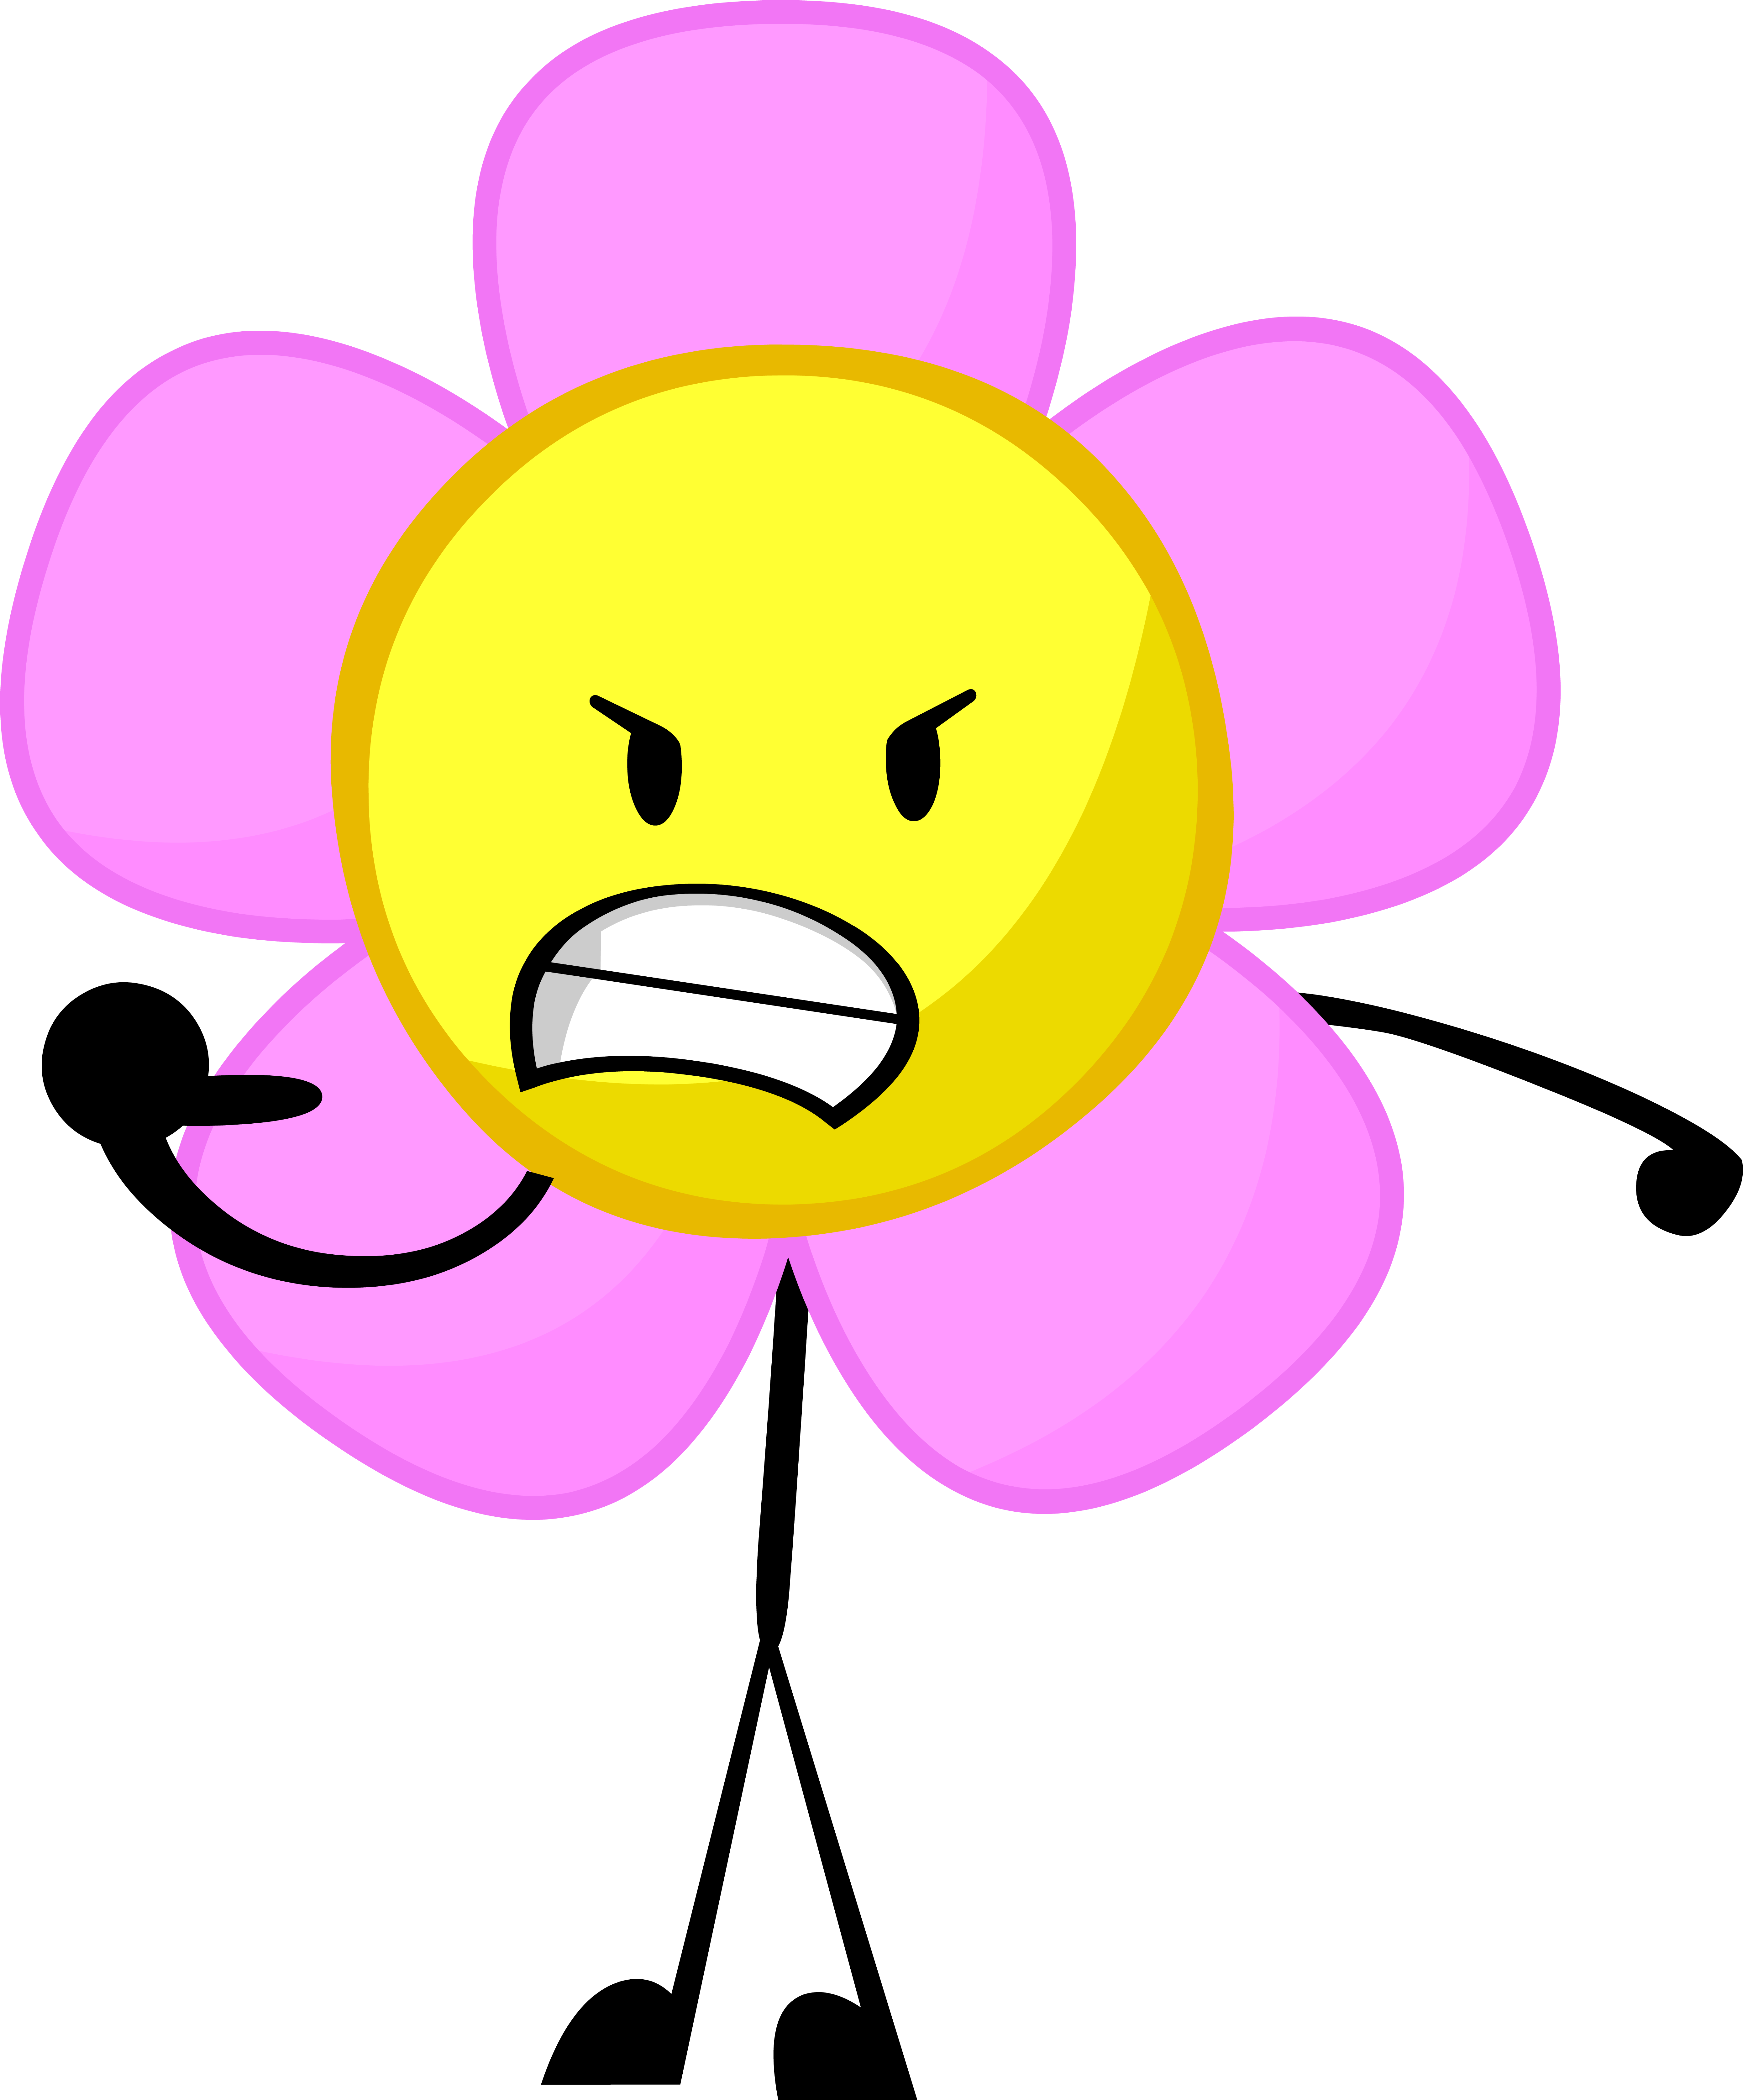 Flower_4.png